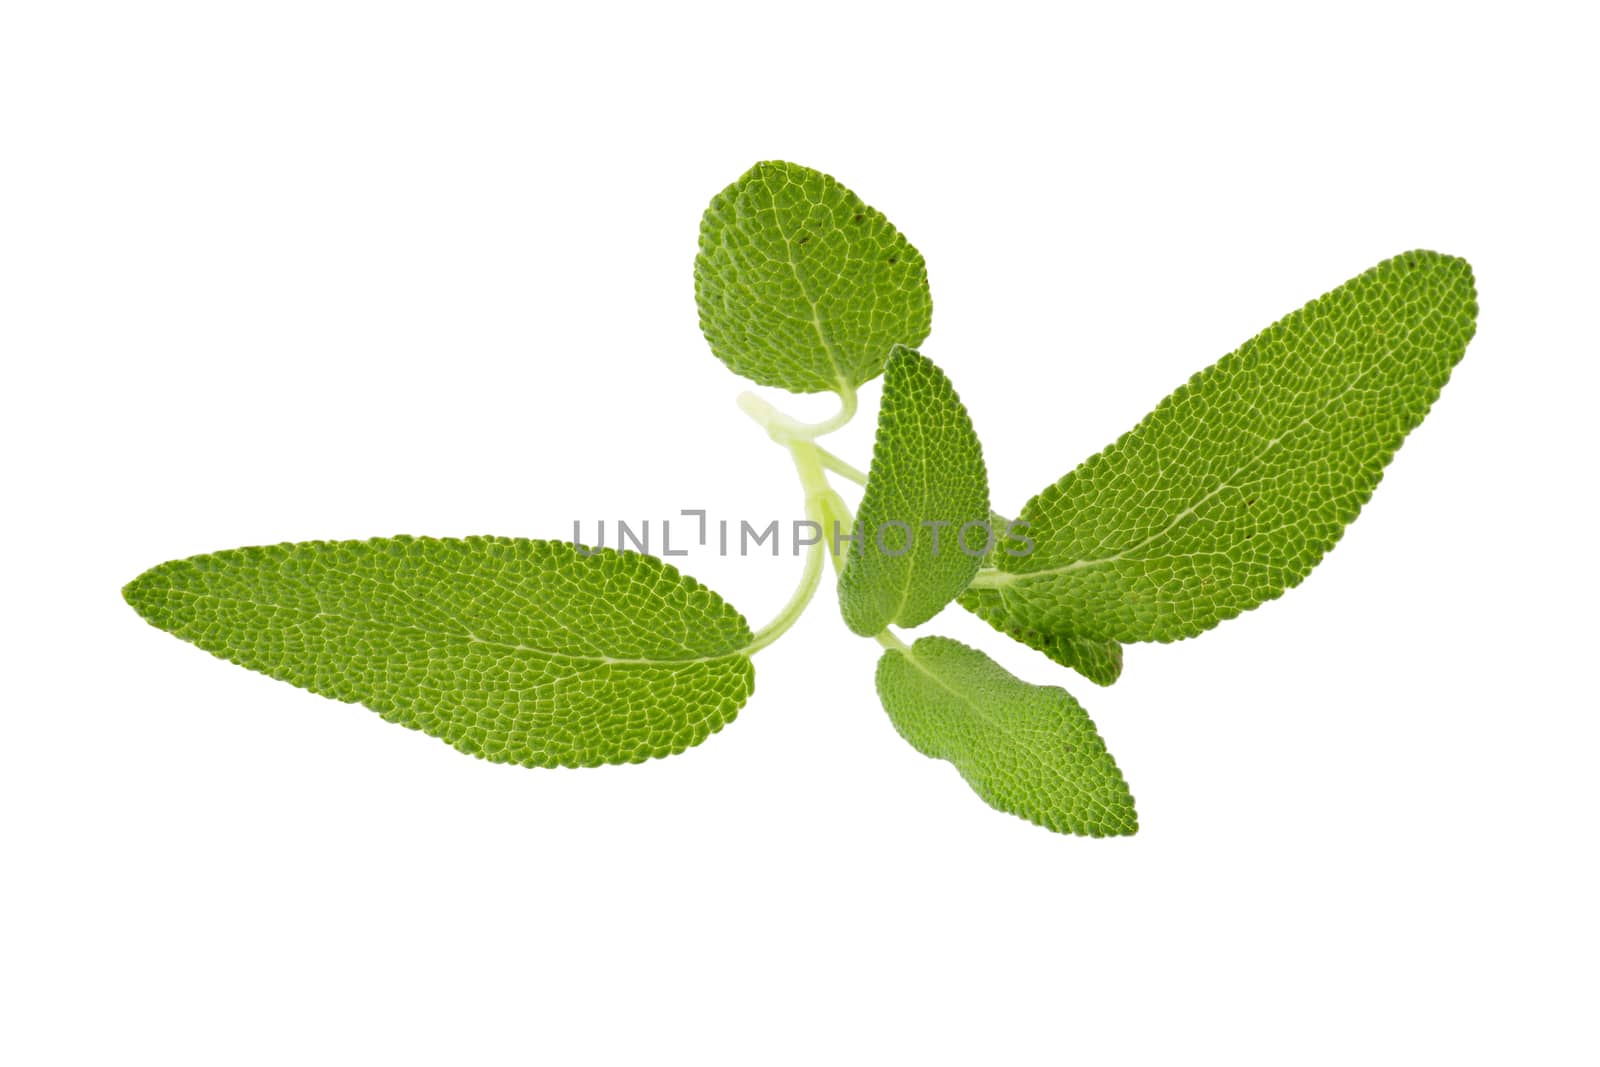 Sage plant isolated on a white background by kaiskynet